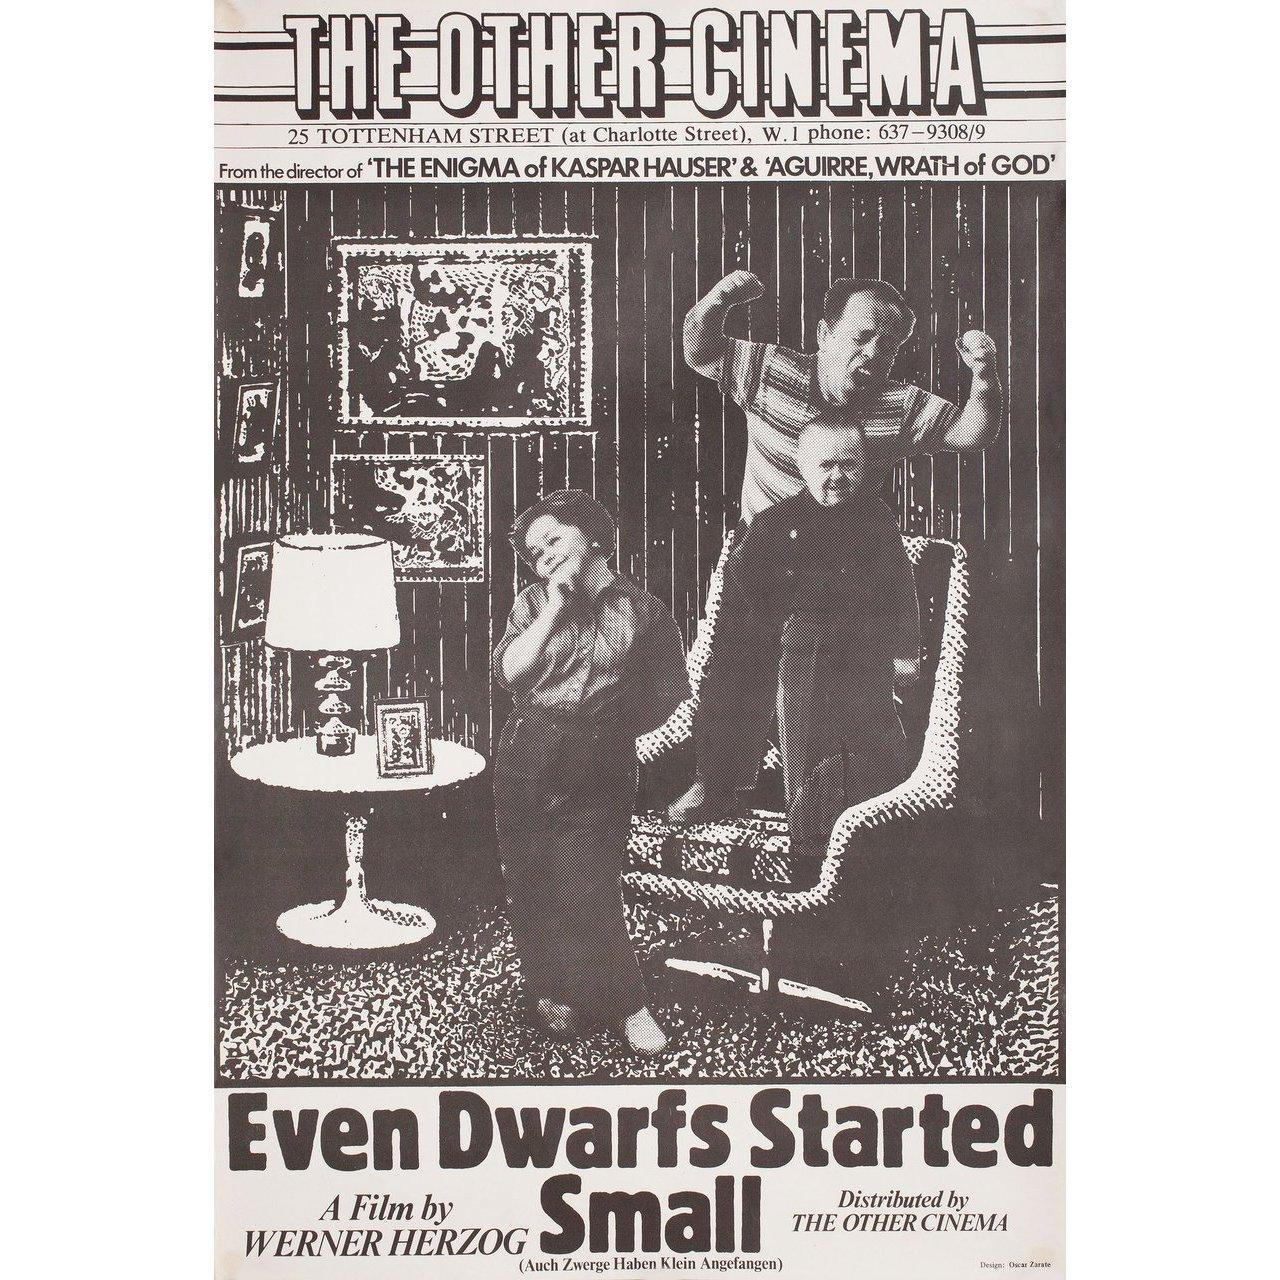 Original 1970s British double crown poster by Oscar Zarate for the first British theatrical release of the film Even Dwarfs Started Small (Auch Zwerge haben klein angefangen) directed by Werner Herzog with Helmut Doring / Paul Glauer / Gisela